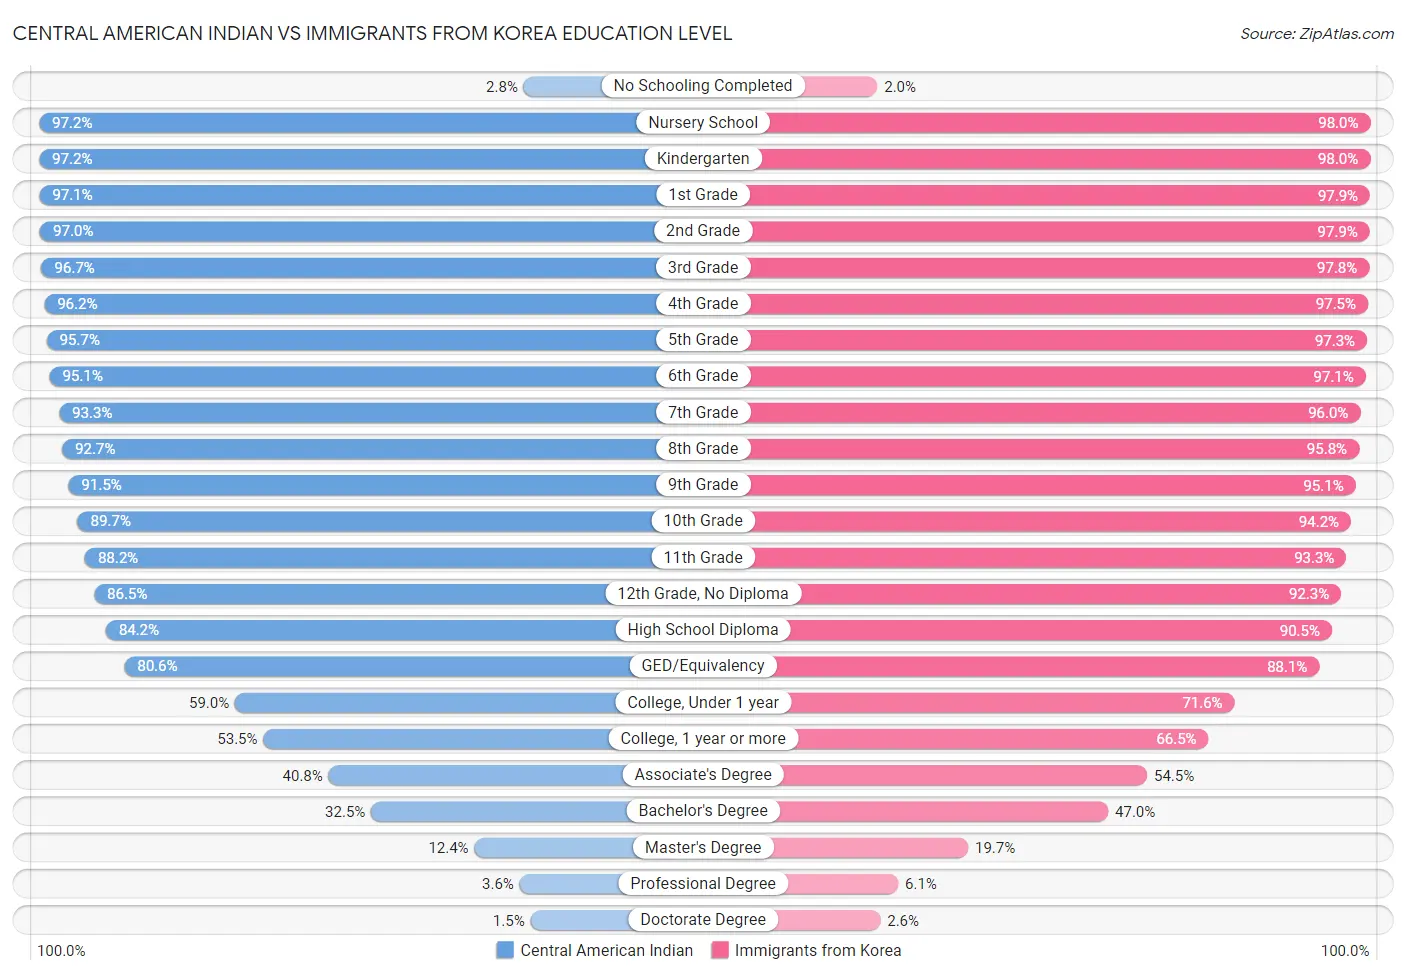 Central American Indian vs Immigrants from Korea Education Level